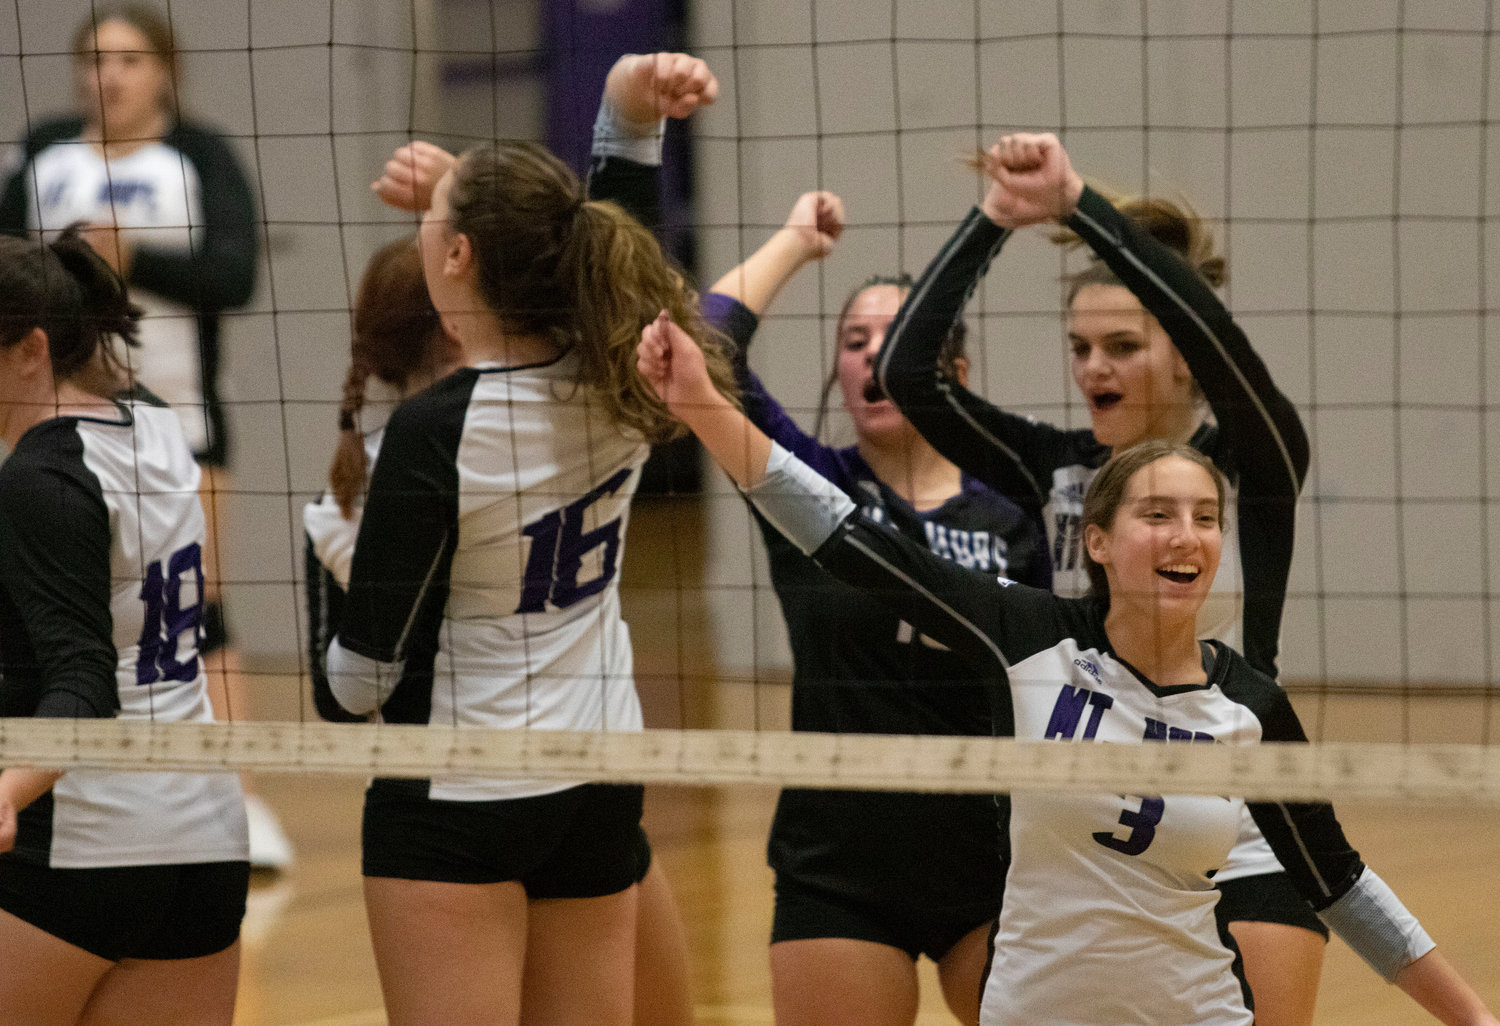 Emma Torres (right) and the team celebrate a Huskies point.